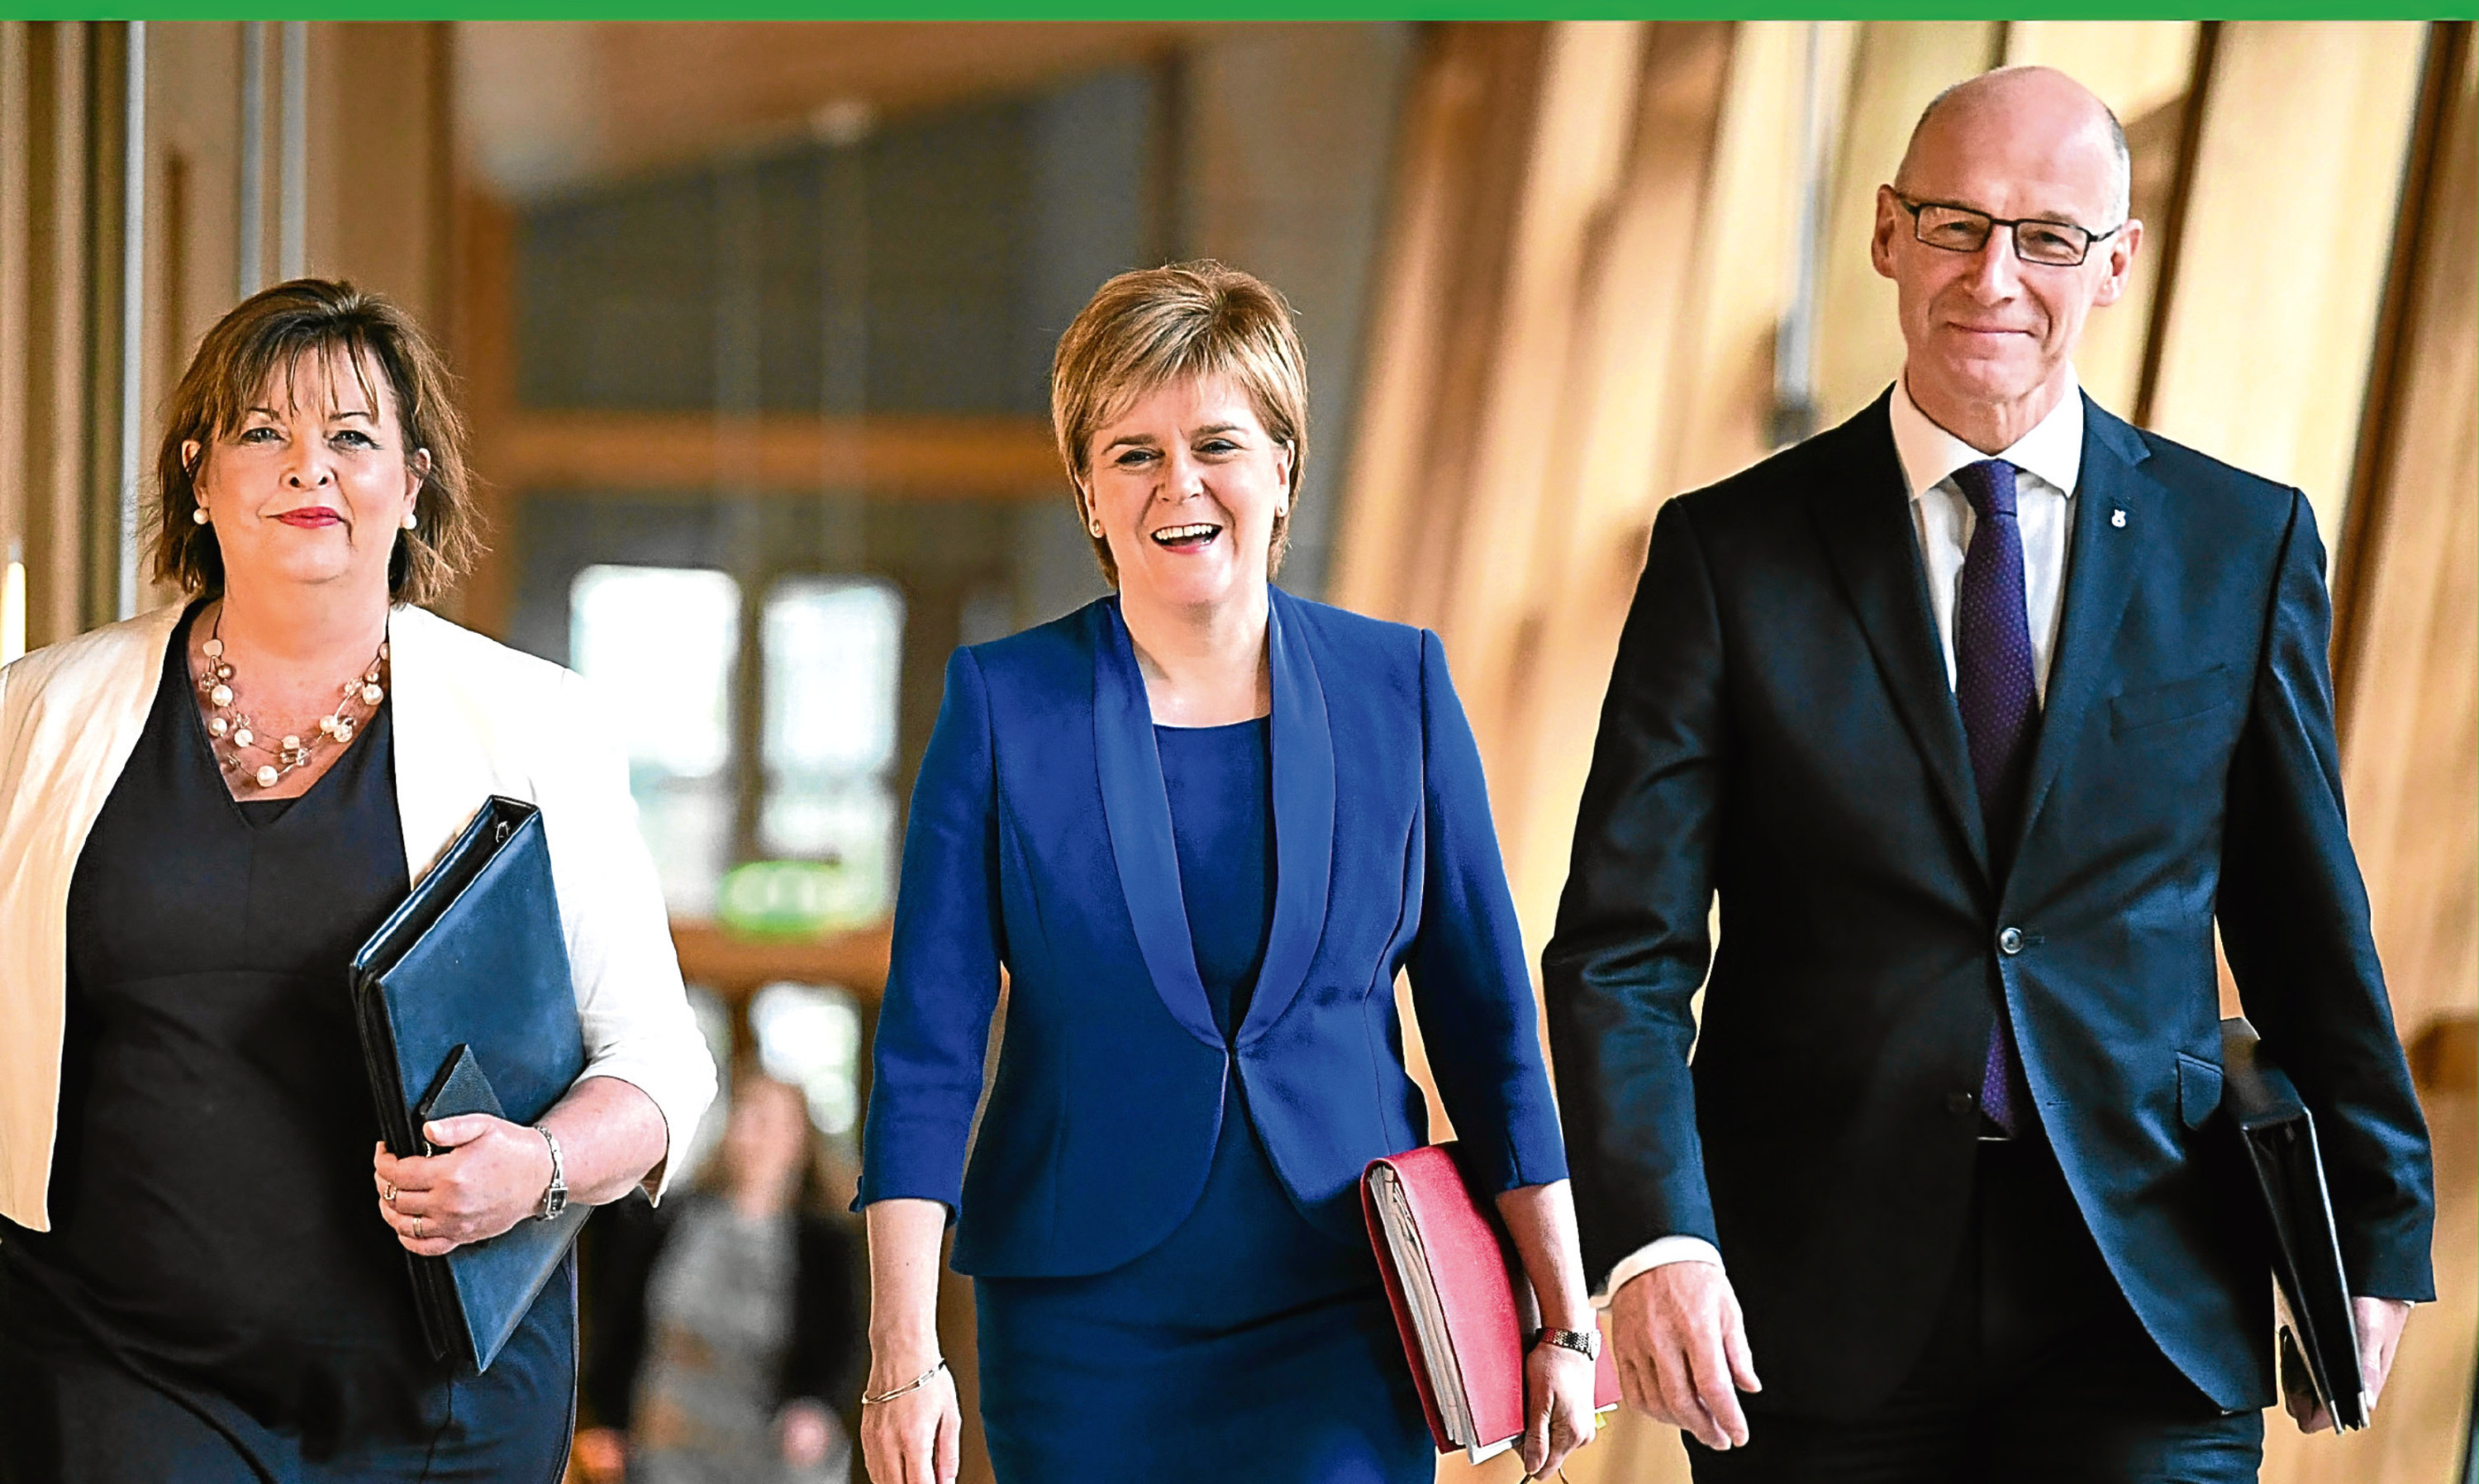 First Minister Nicola Sturgeon with cabinet secretaries Fiona Hyslop and John Swinney before making her statement on Tuesday.